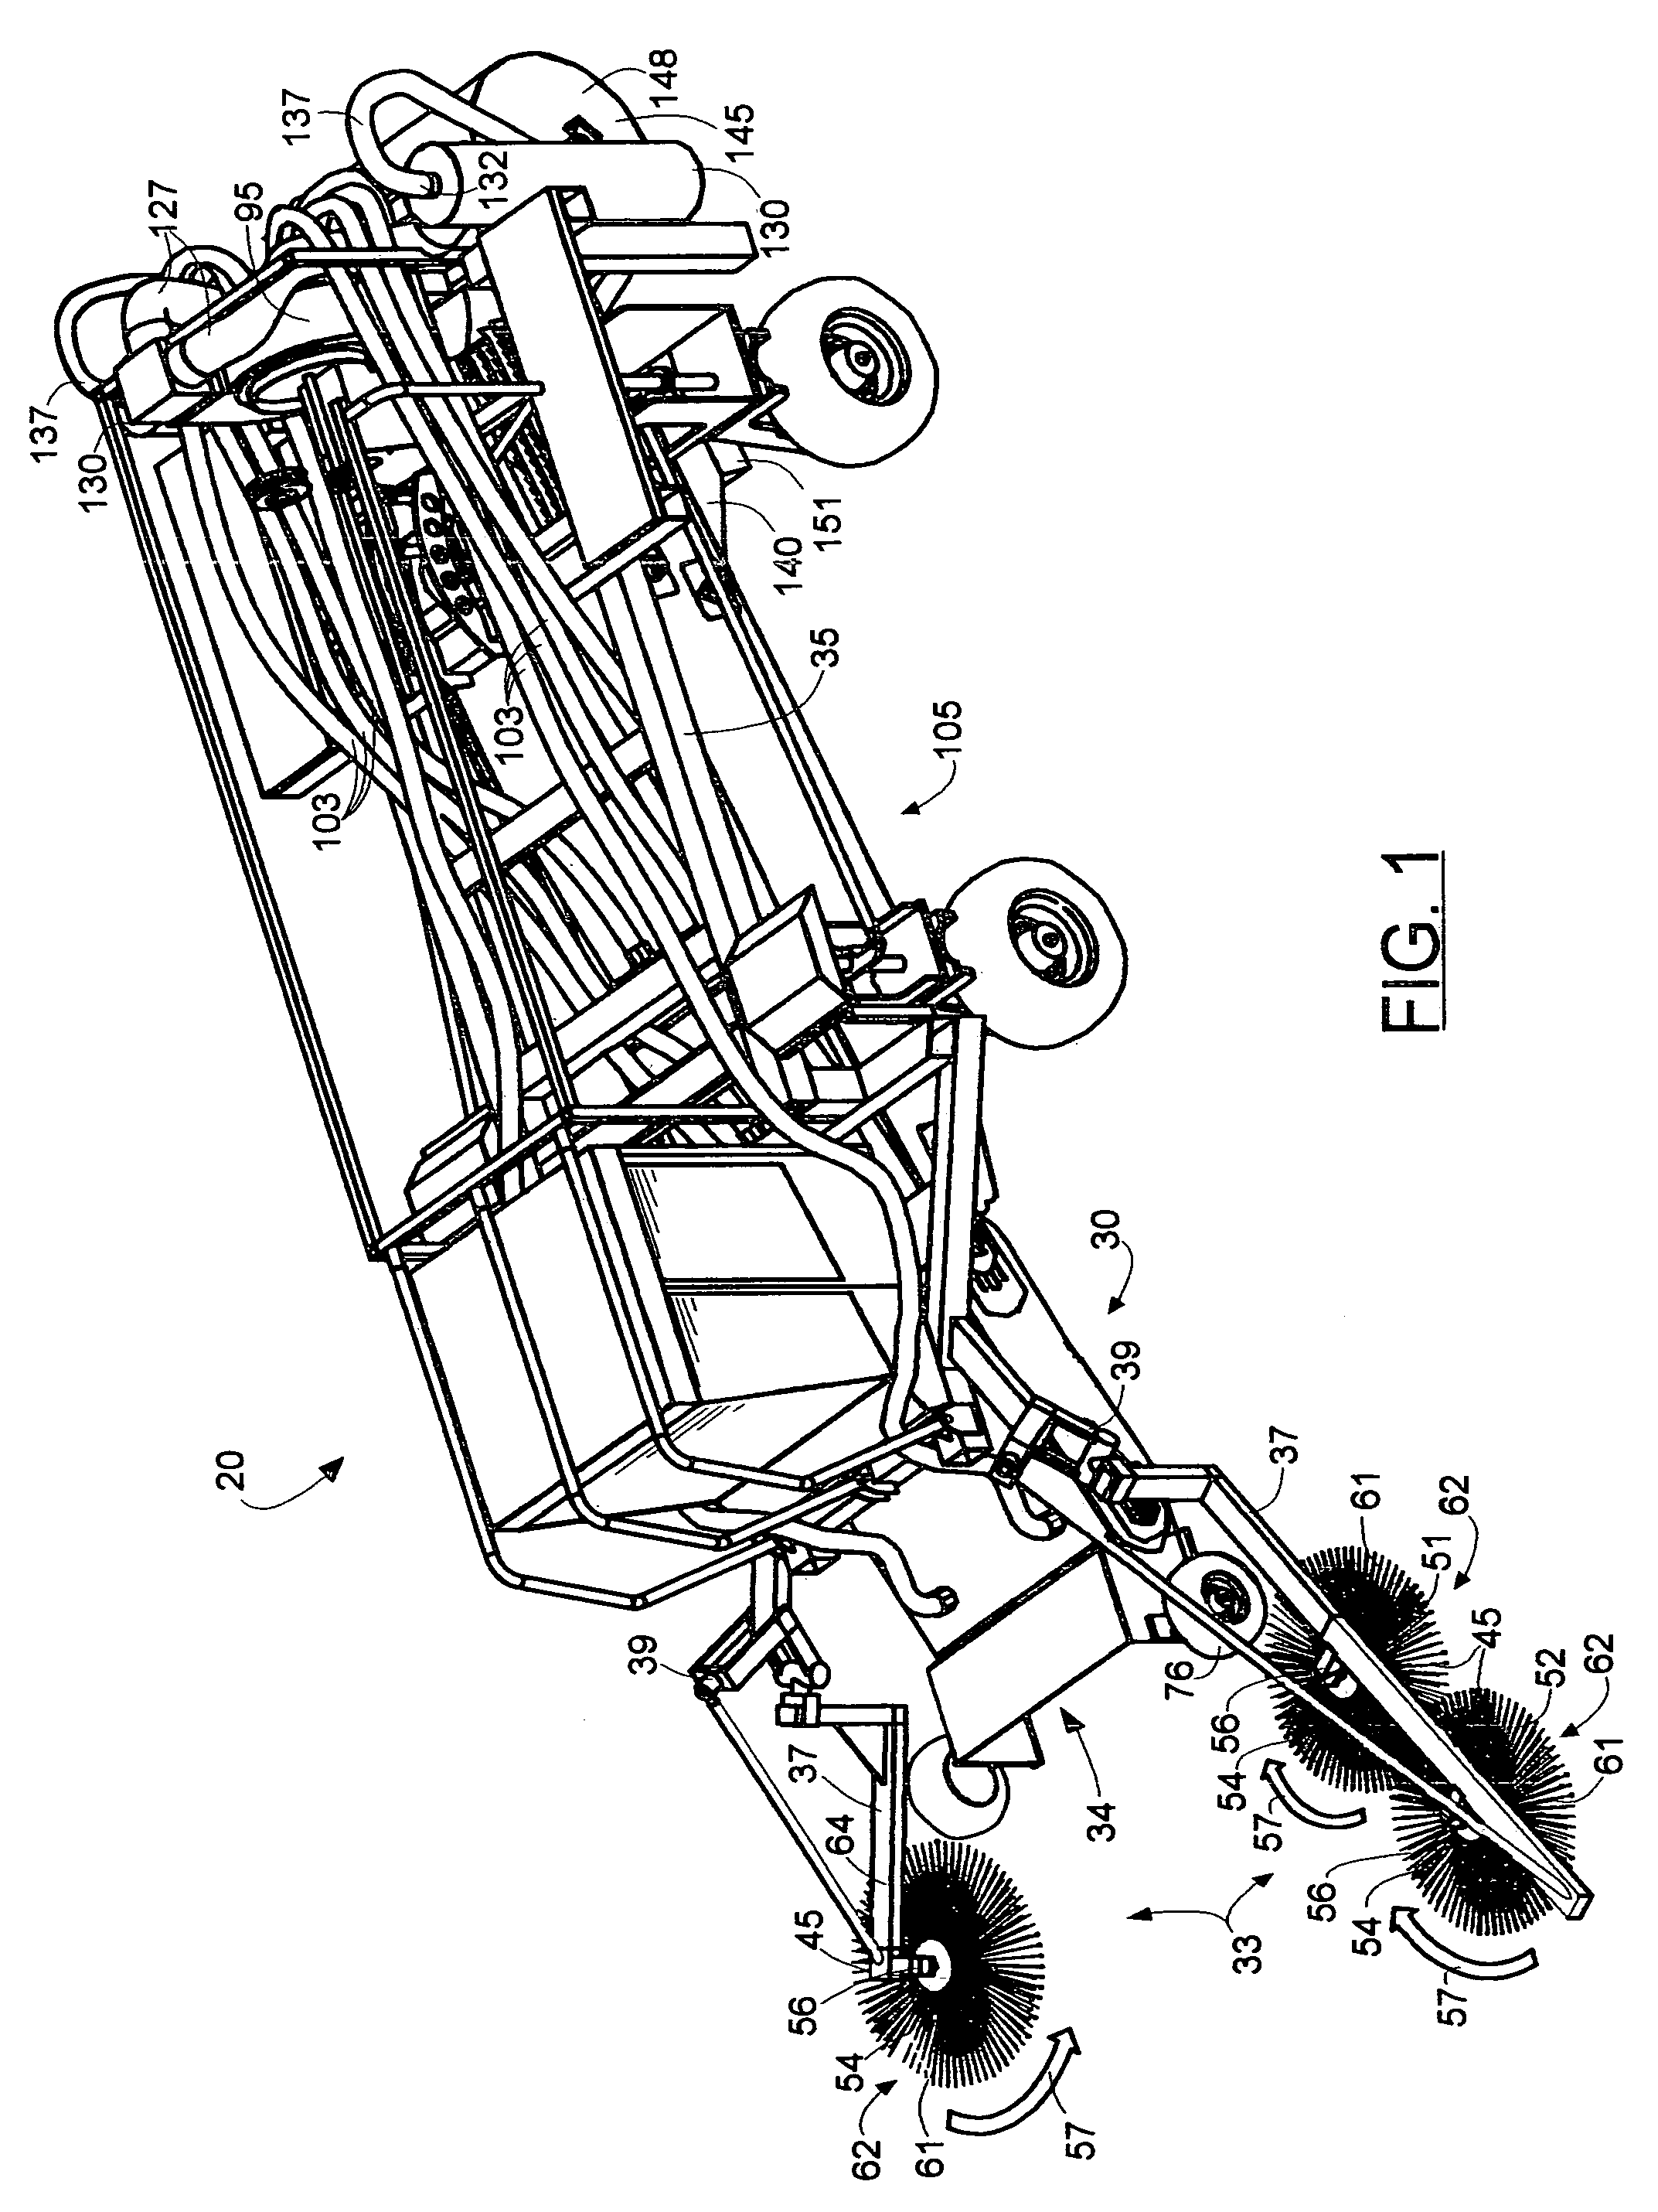 Method for retrieving and processing bulk harvested nuts and fruits